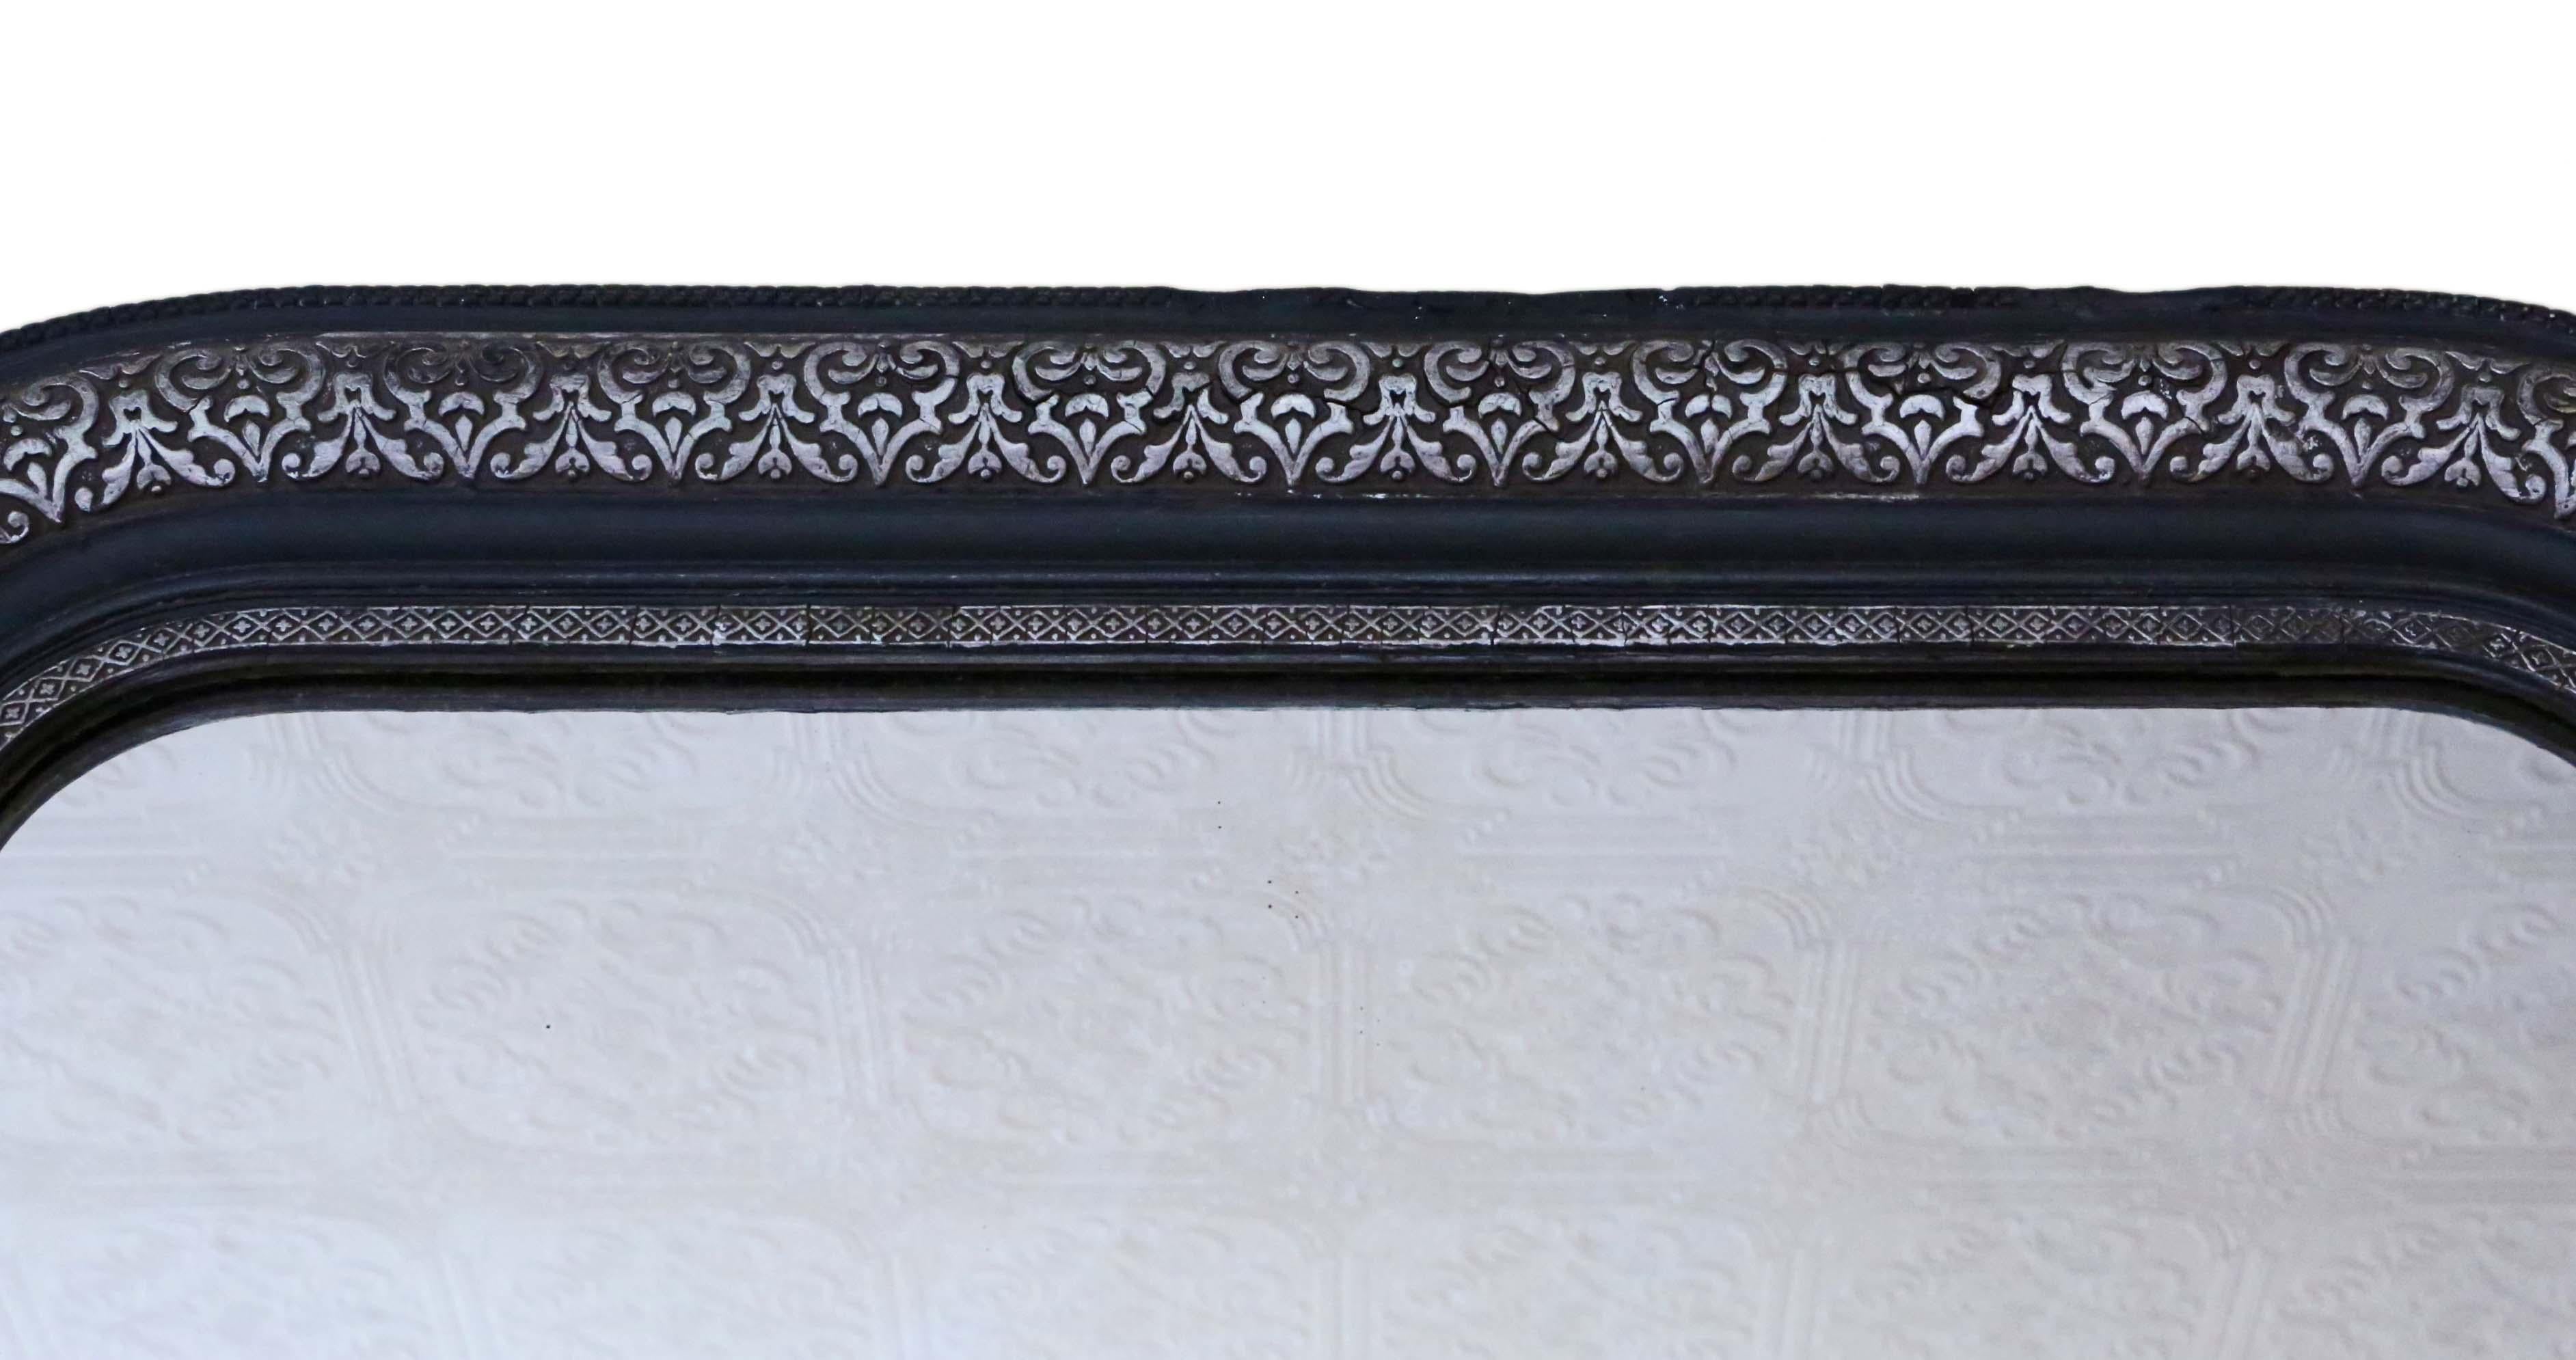 Ebonized Antique Large Ebonised Silver Gilt Wall Mirror Overmantle Late 19th Century For Sale